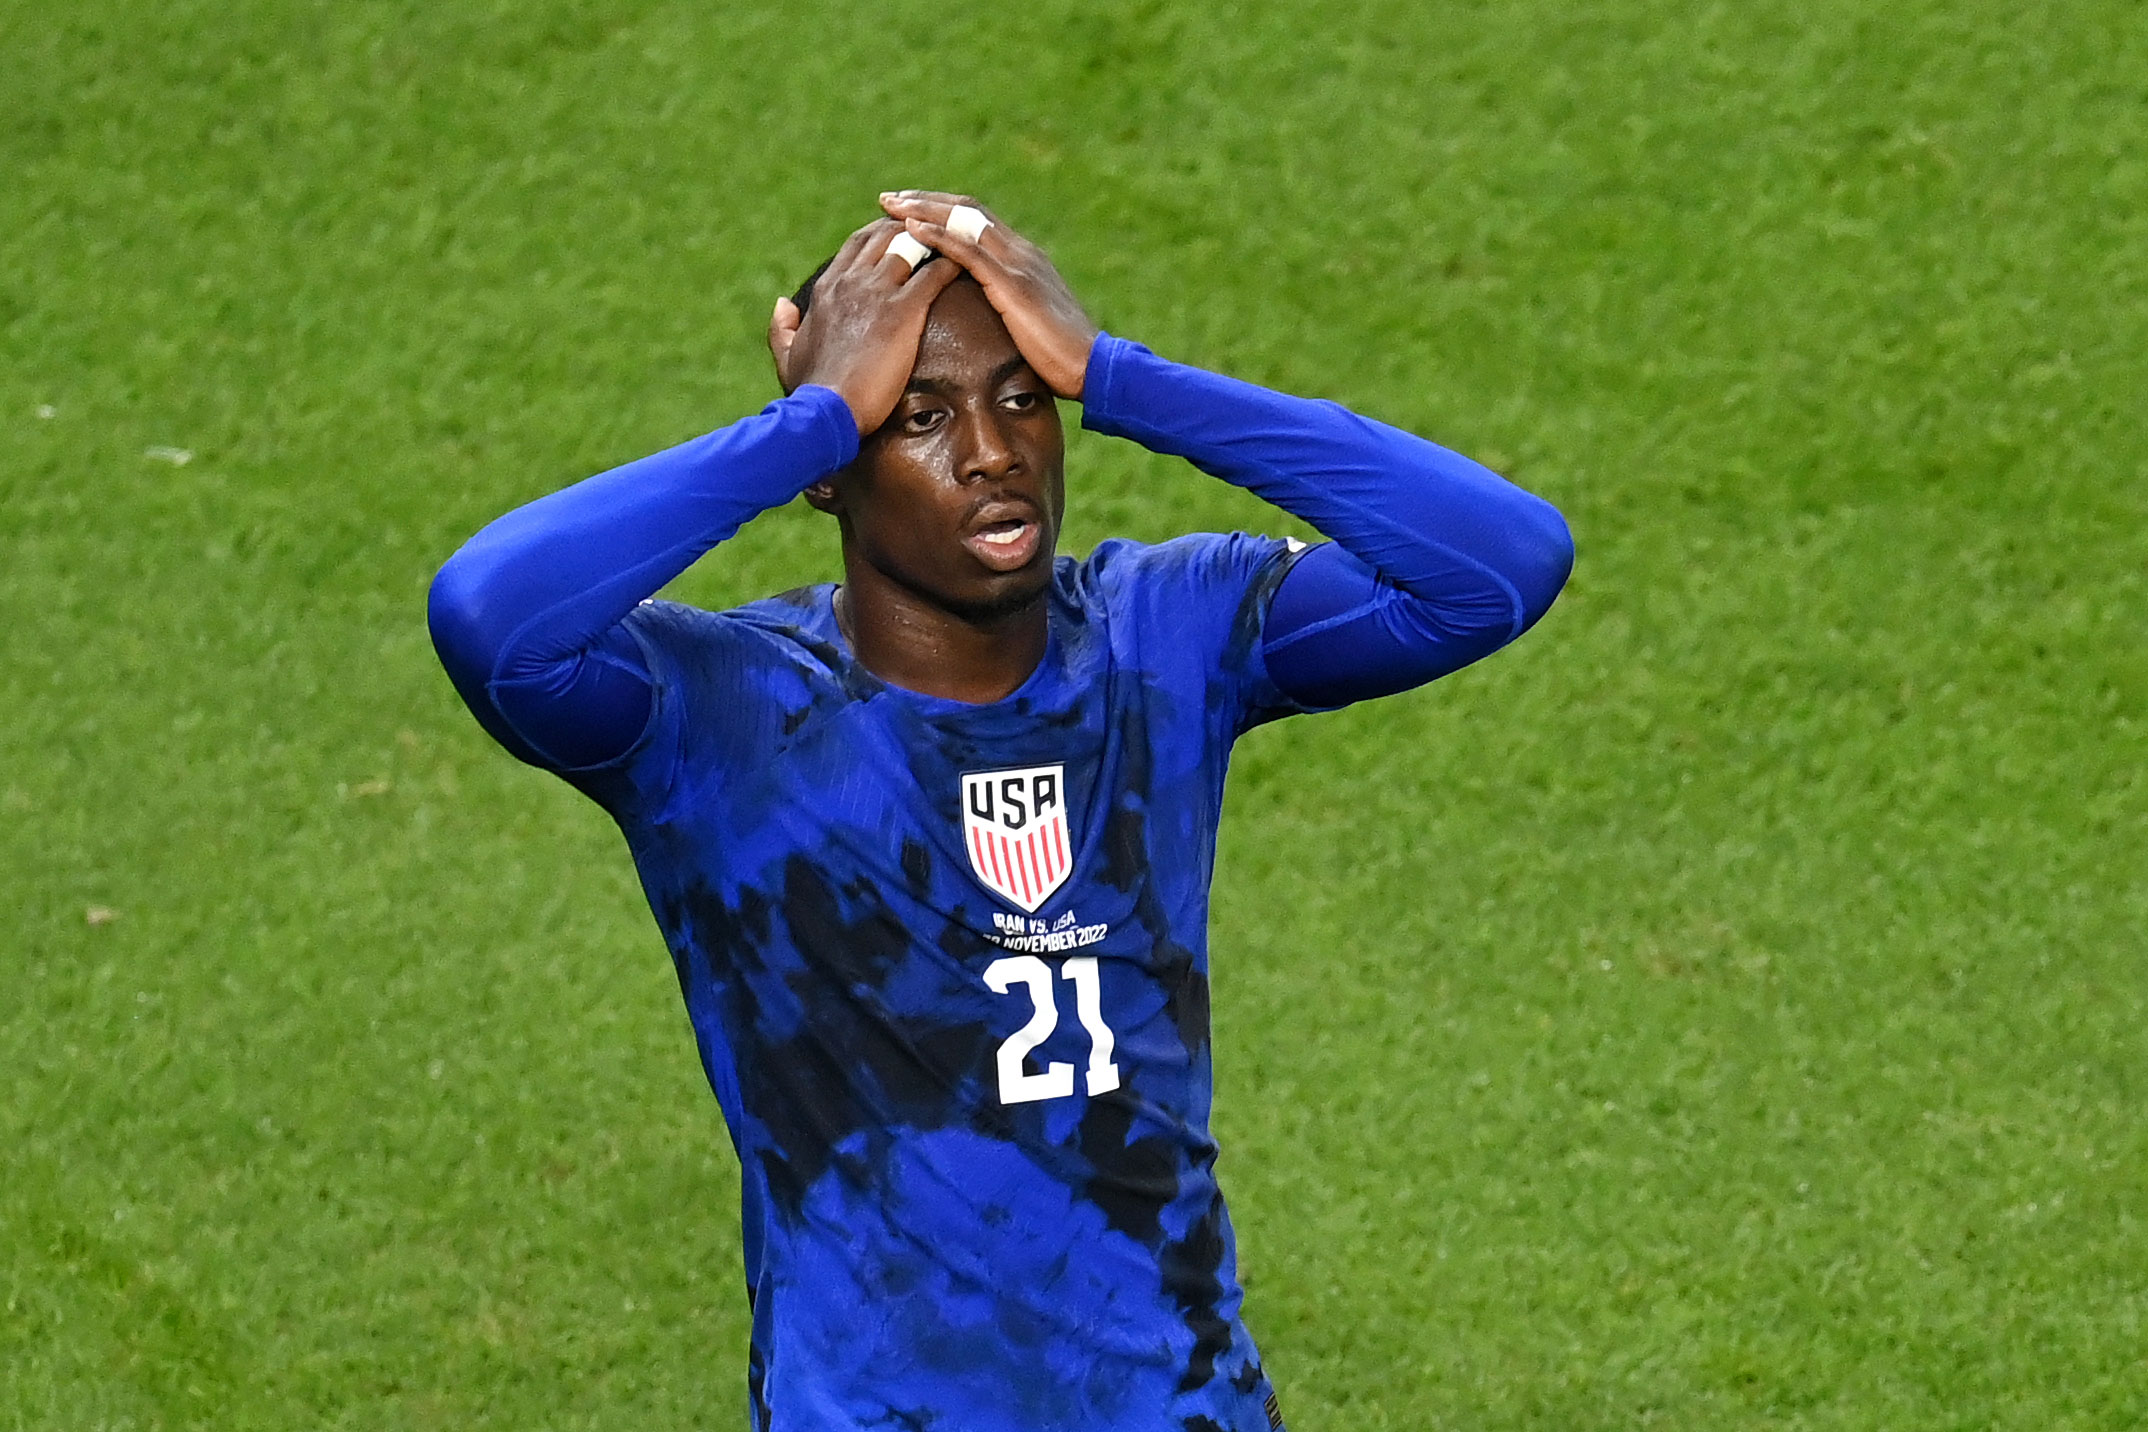 The United States' Timothy Weah reacted to the goal but was ruled offside.